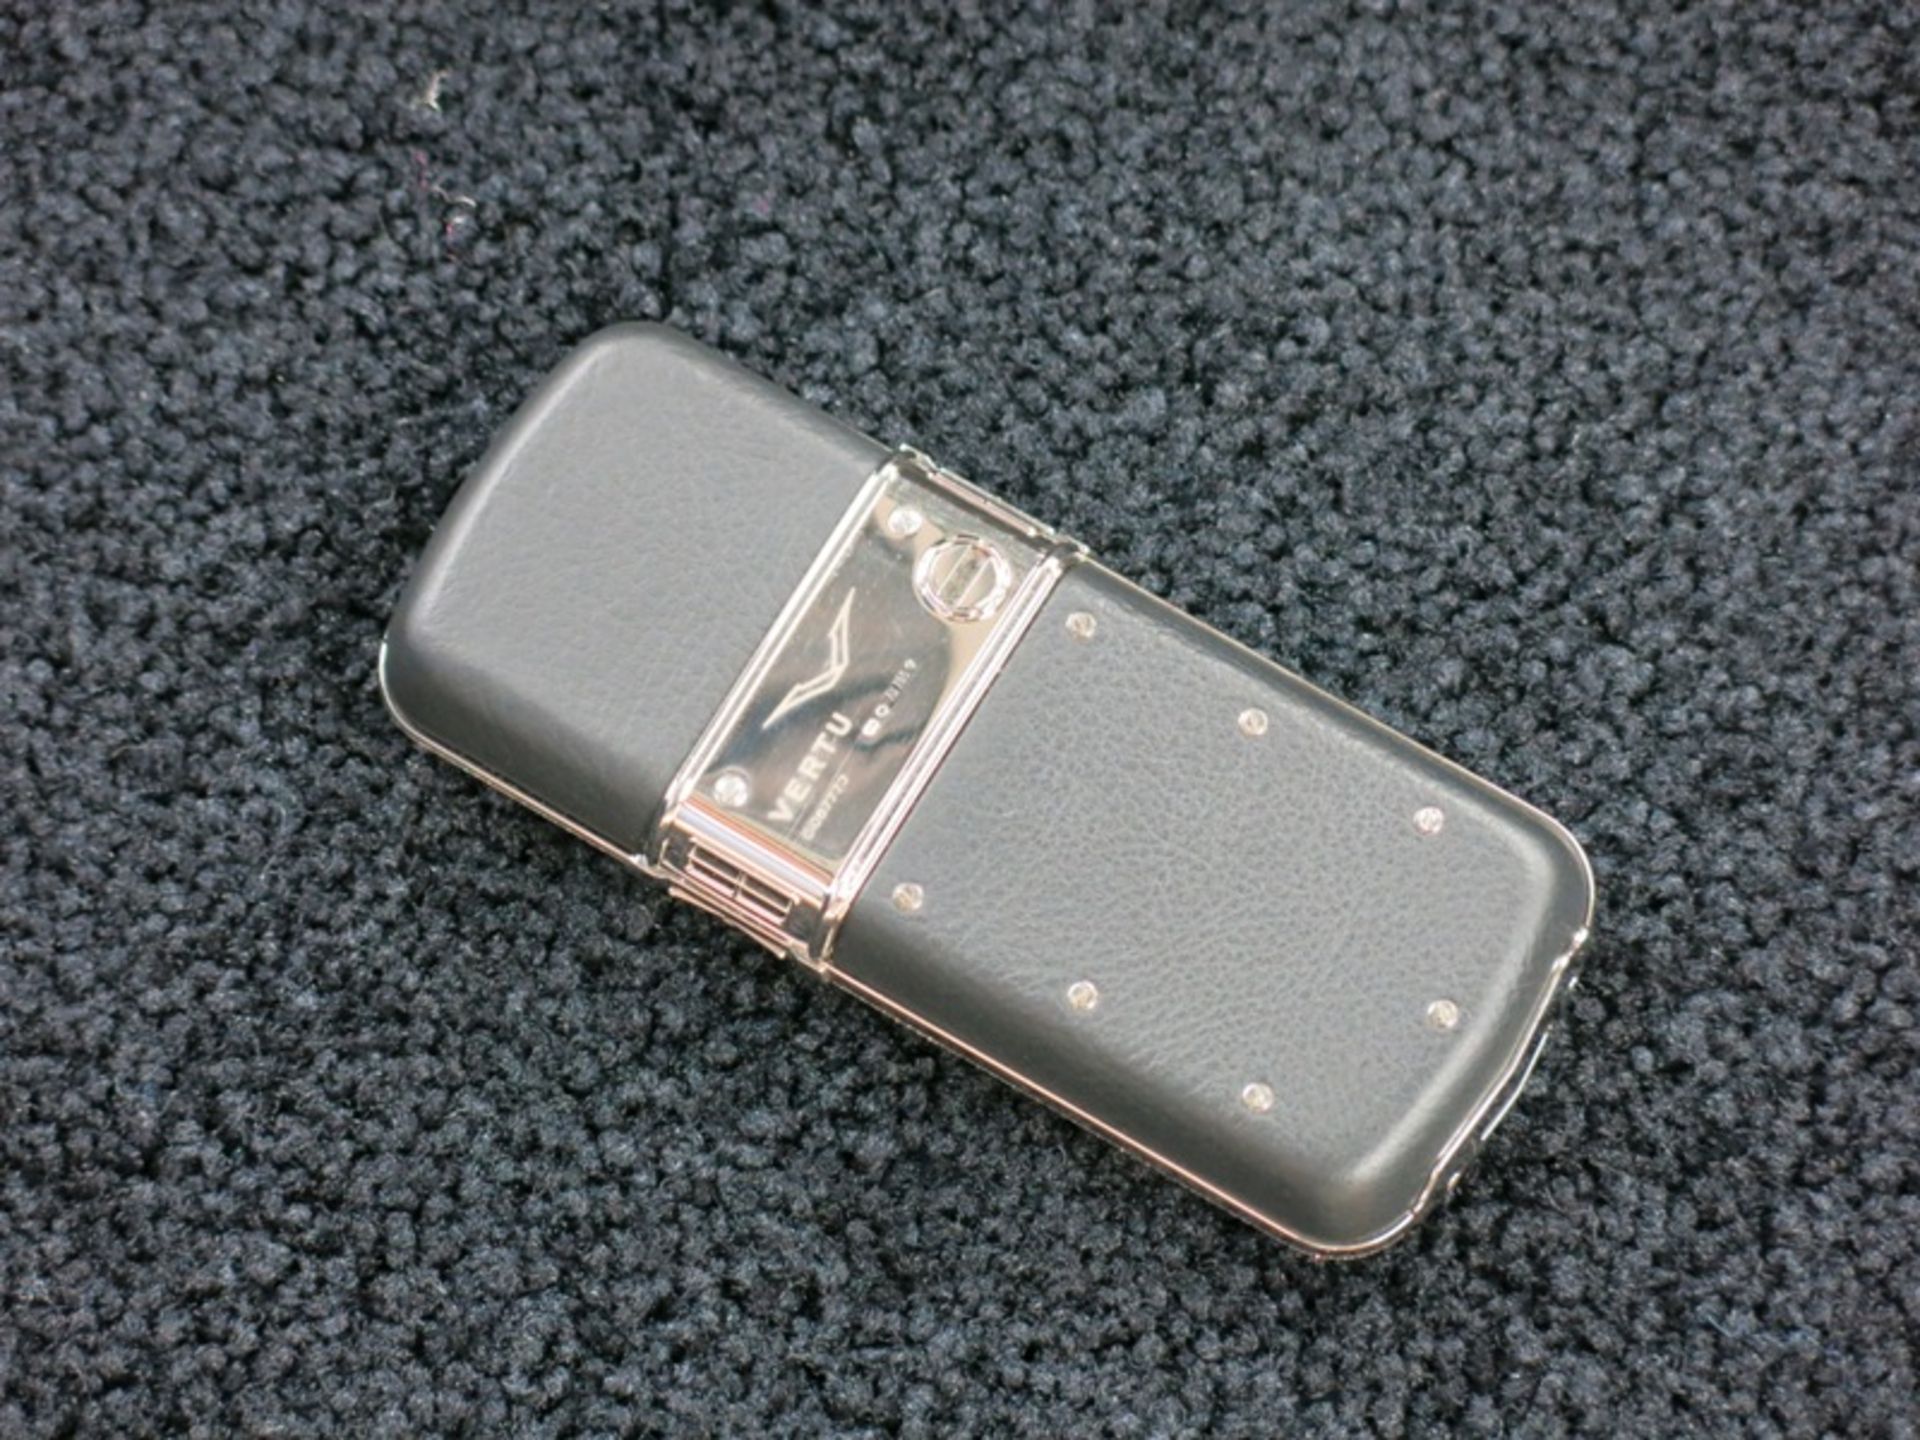 Vertu Constellation Classic Phone with 18kt White Gold & Diamond Trim Bezel, Back Plate, Select - Image 7 of 7